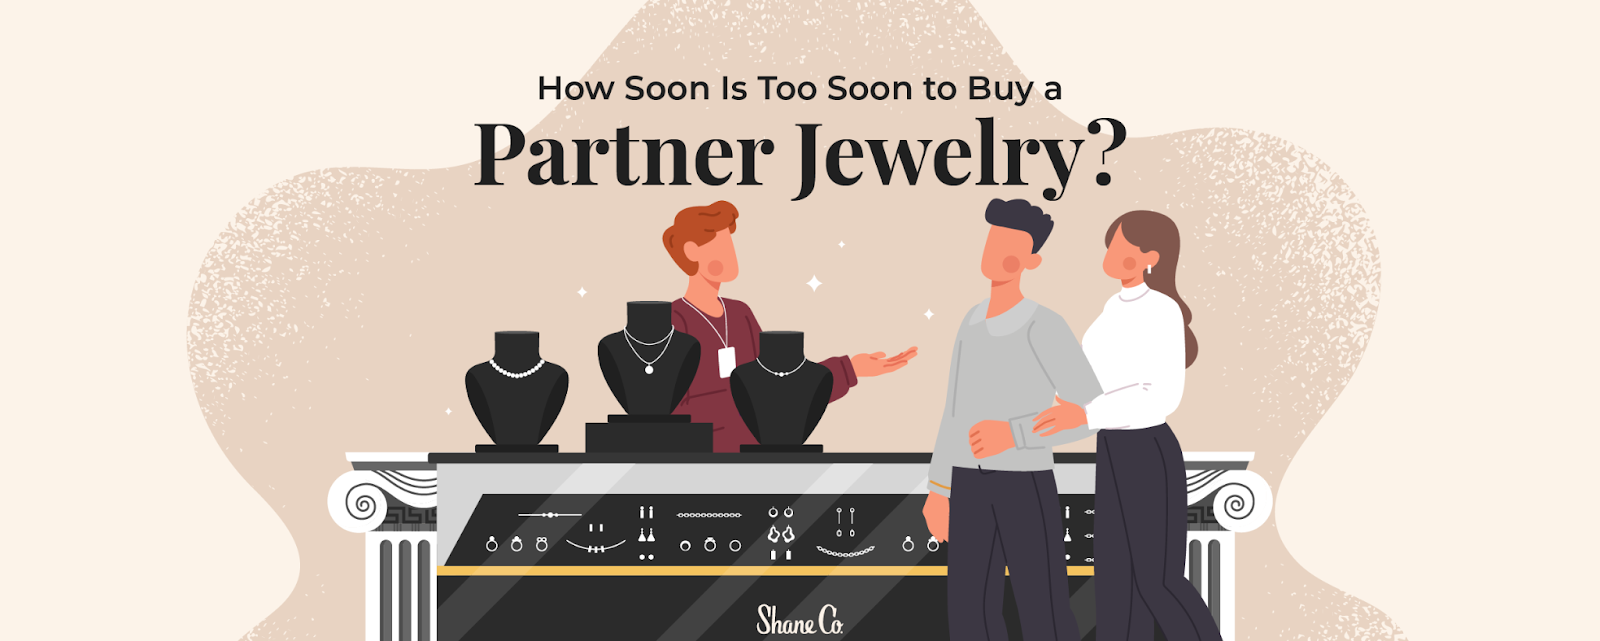 featured image for buying jewelry survey